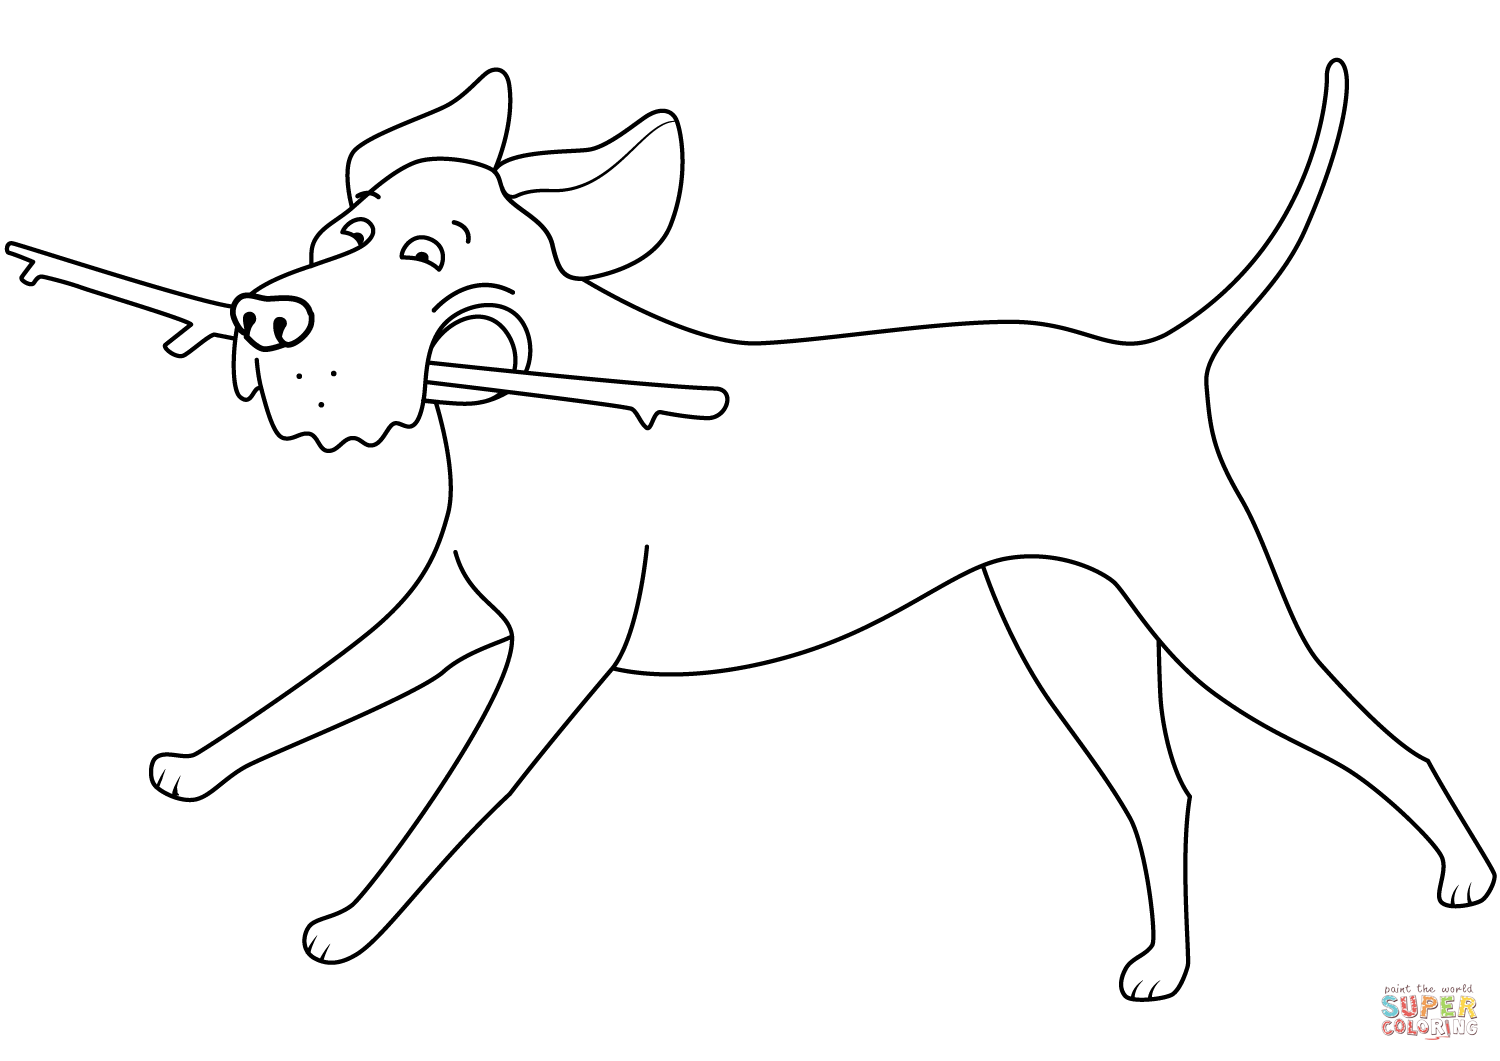 Funny labrador retriever running with stick coloring page free printable coloring pages